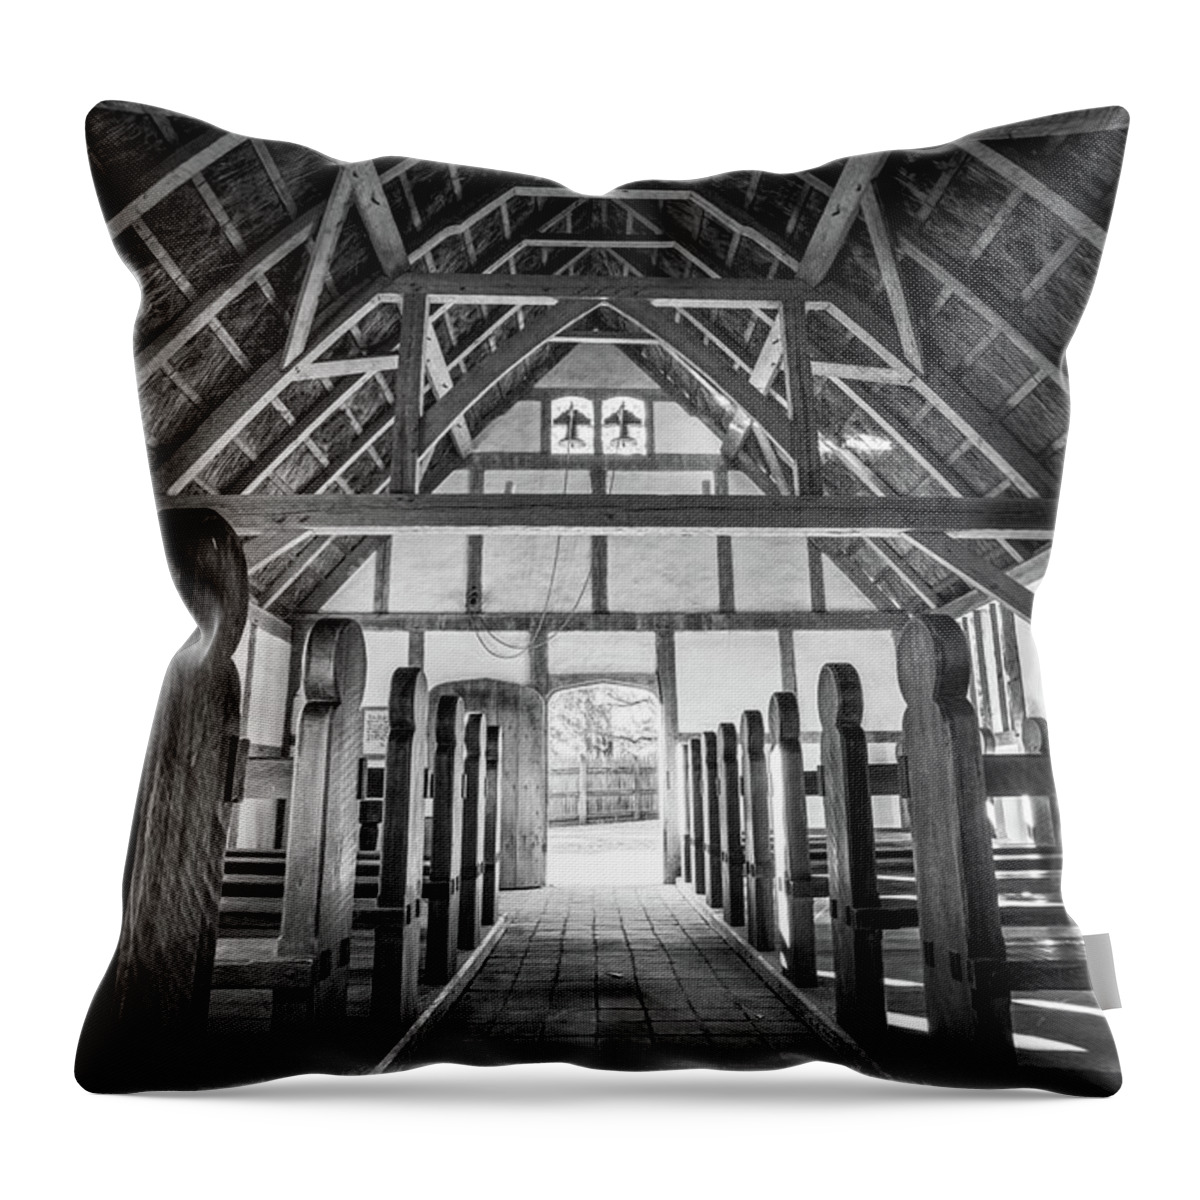 Church Throw Pillow featuring the photograph The Interior of Fort James' Anglican Church - Oil Painting Style - Black and White by Rachel Morrison